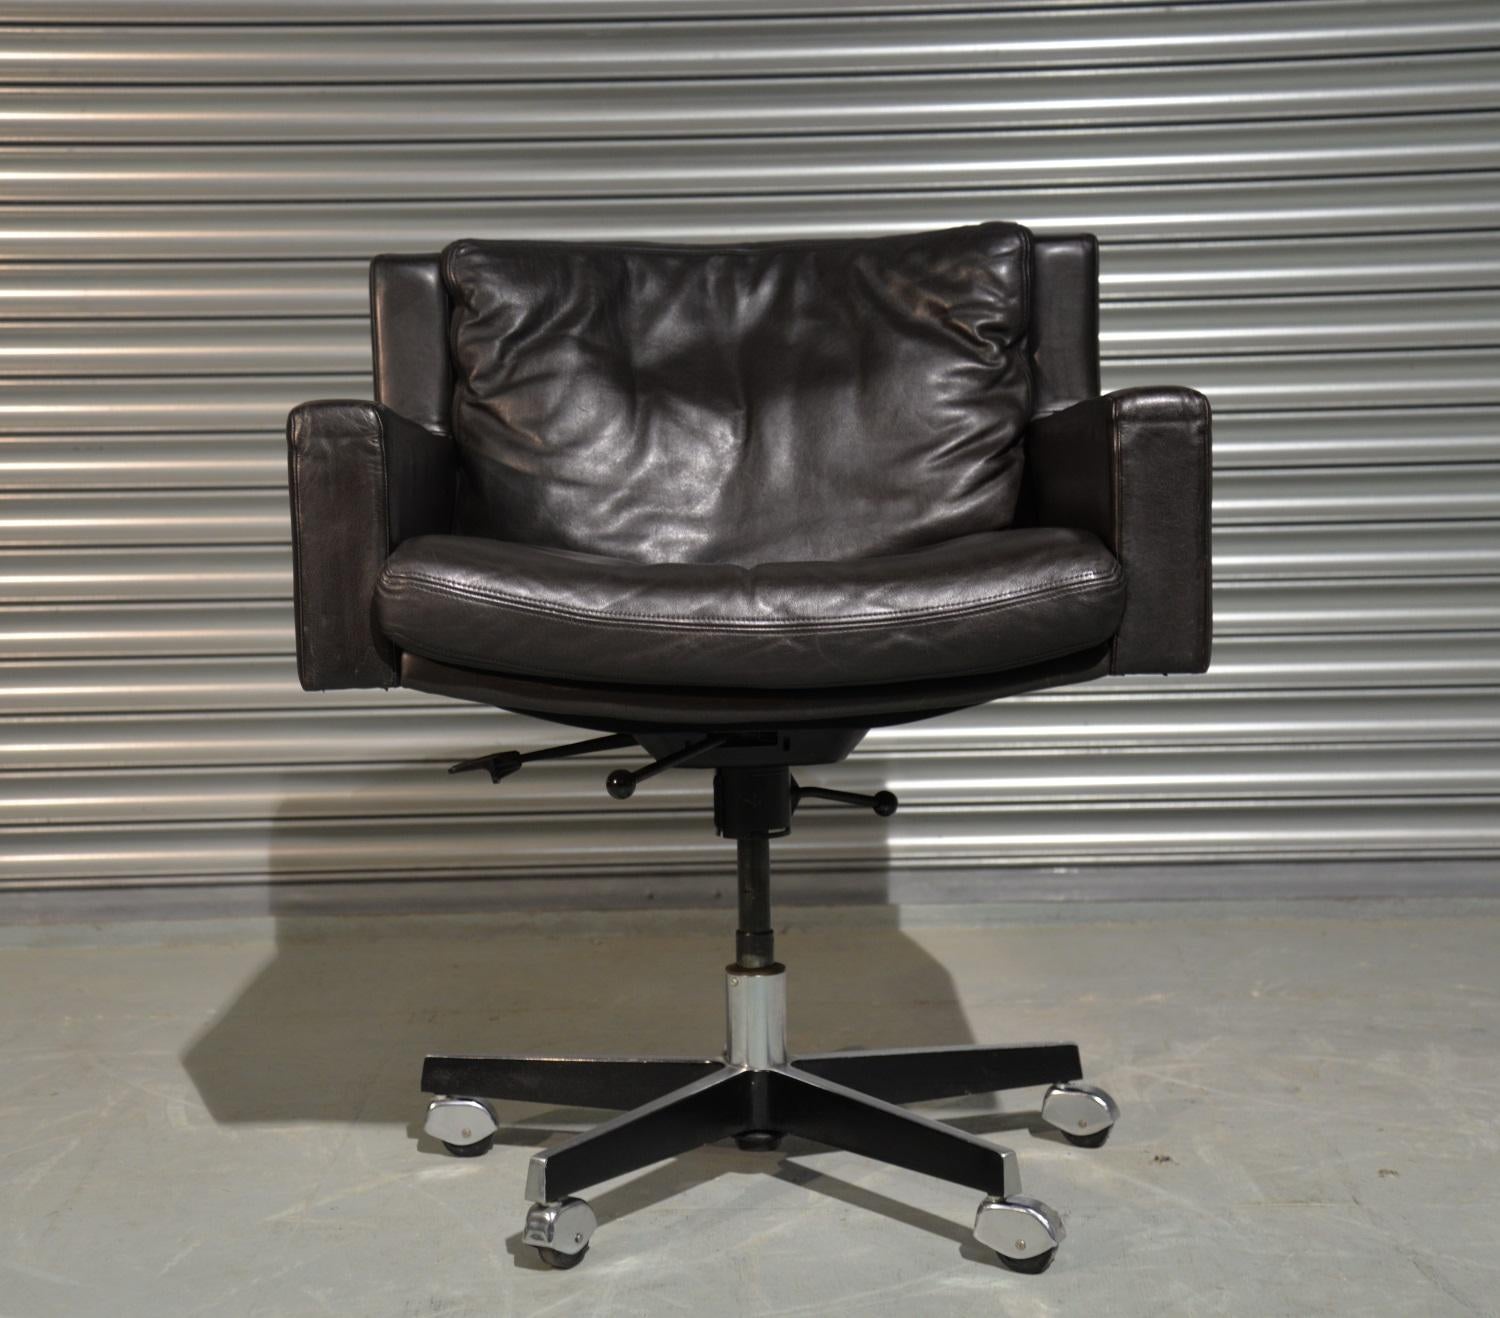 Discounted airfreight for our International and US customers ( from 2 weeks door to door )

A highly desirable vintage Robert Haussmann swivel leather armchair on castors for De Sede. Rarely available and built in the late 1950s by De Sede craftsman